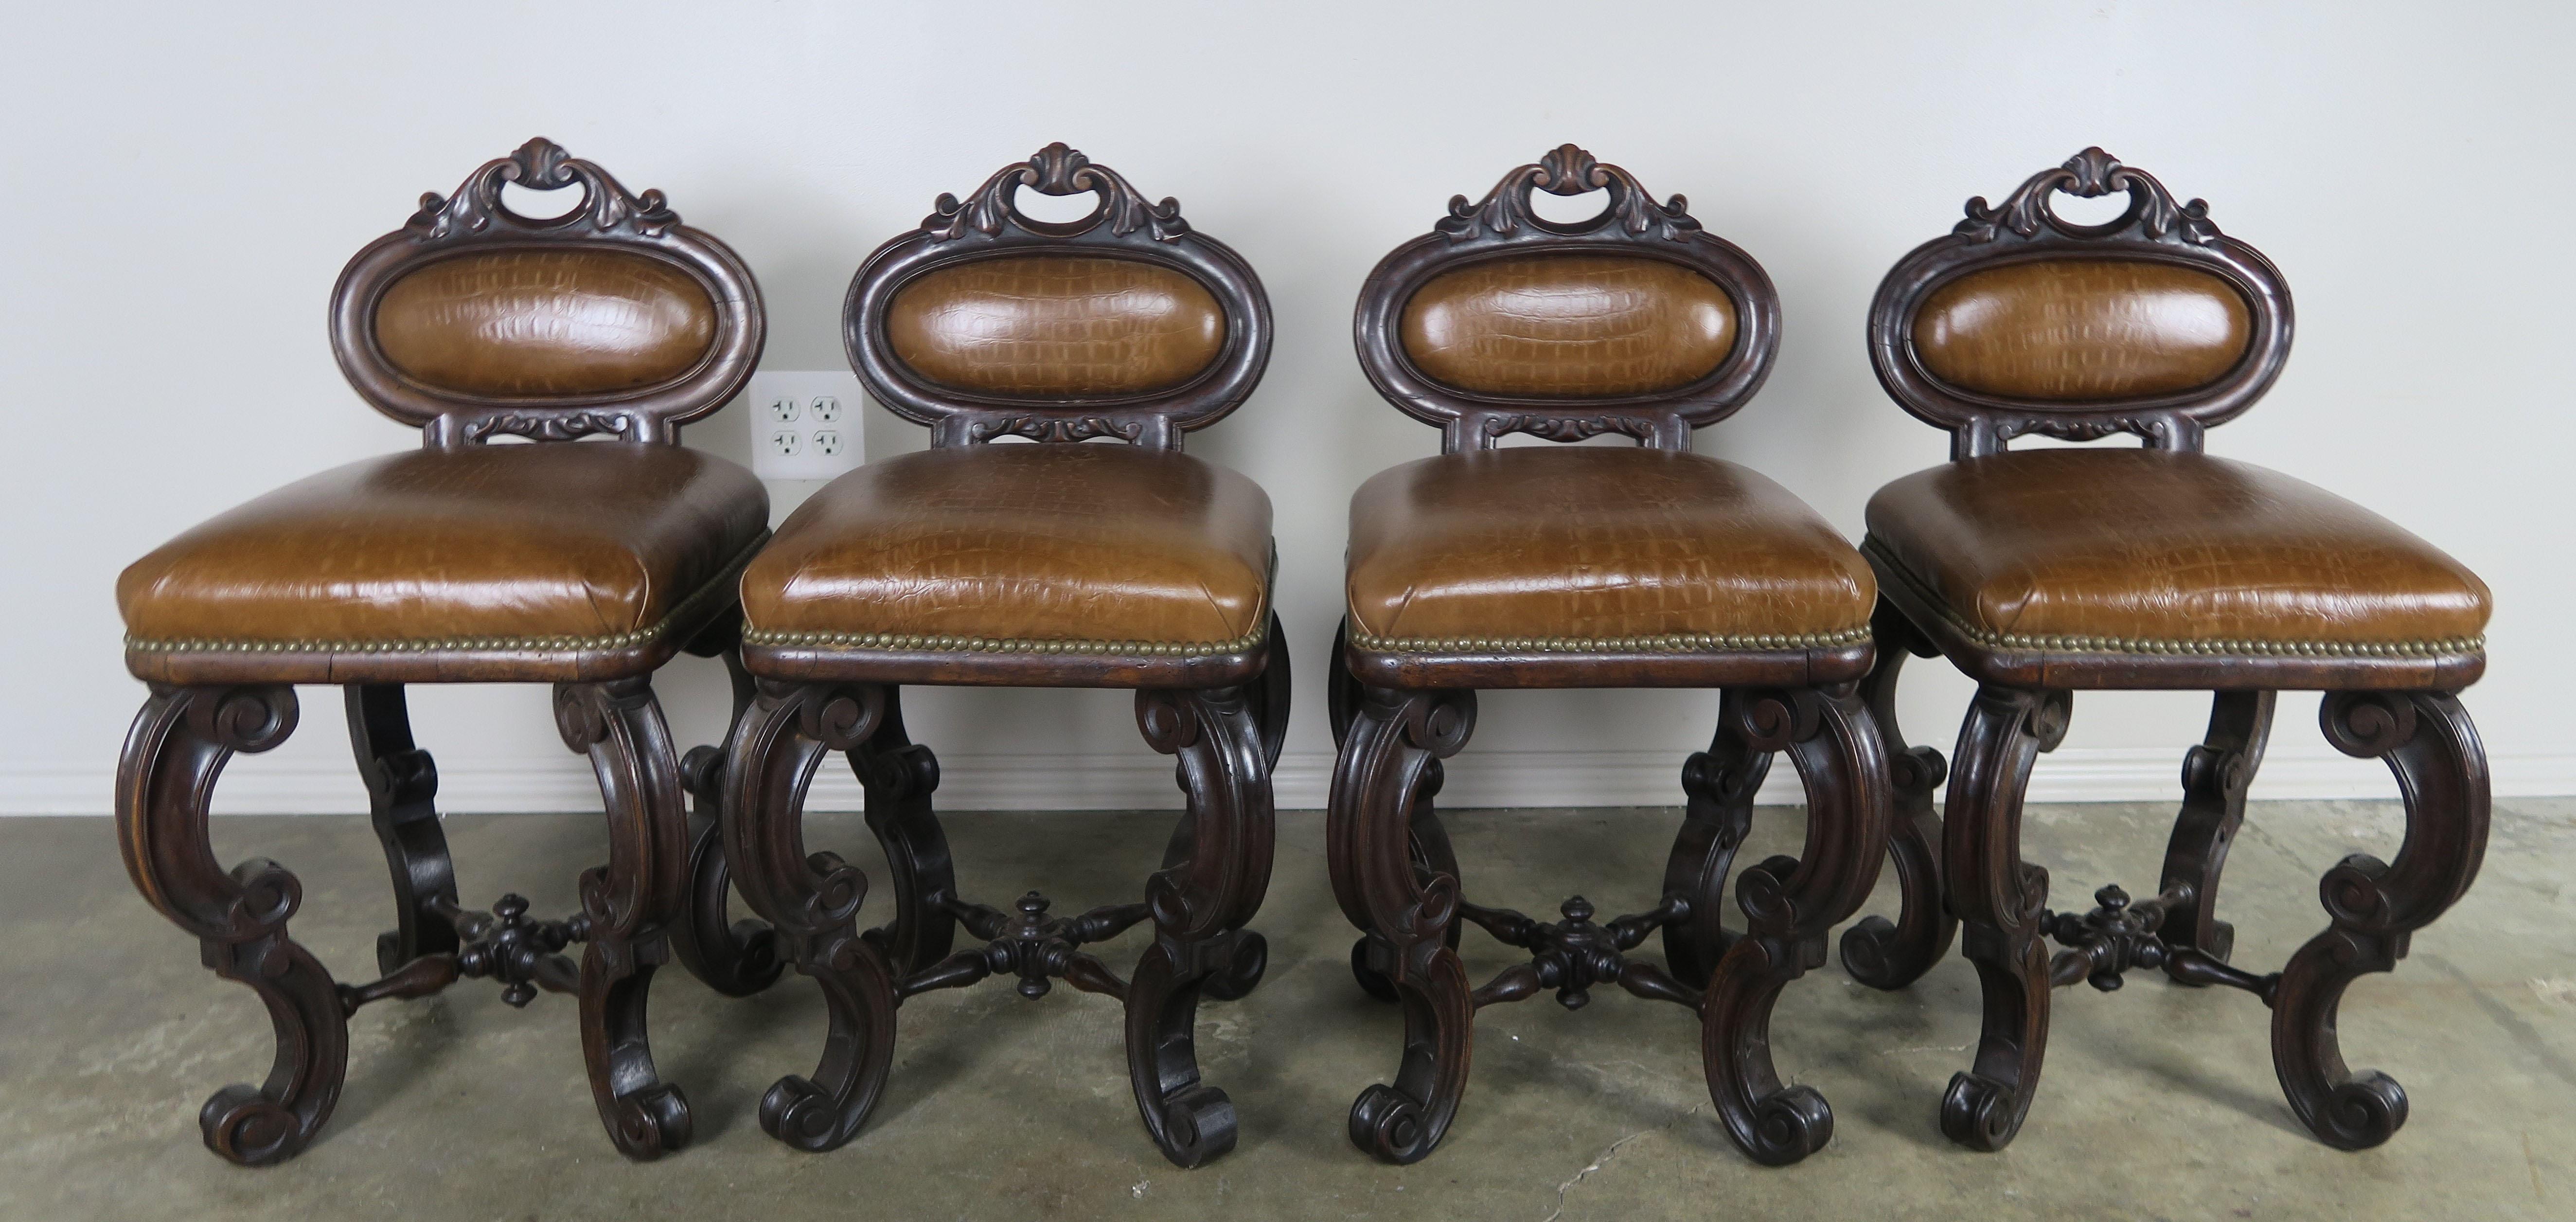 Set of four French embossed leather armchairs upholstered in a leather that resembles crocodile. Great set of petite occasional armchairs that would also make great game chairs around a game table. These unique armchairs stand on four cabriole style